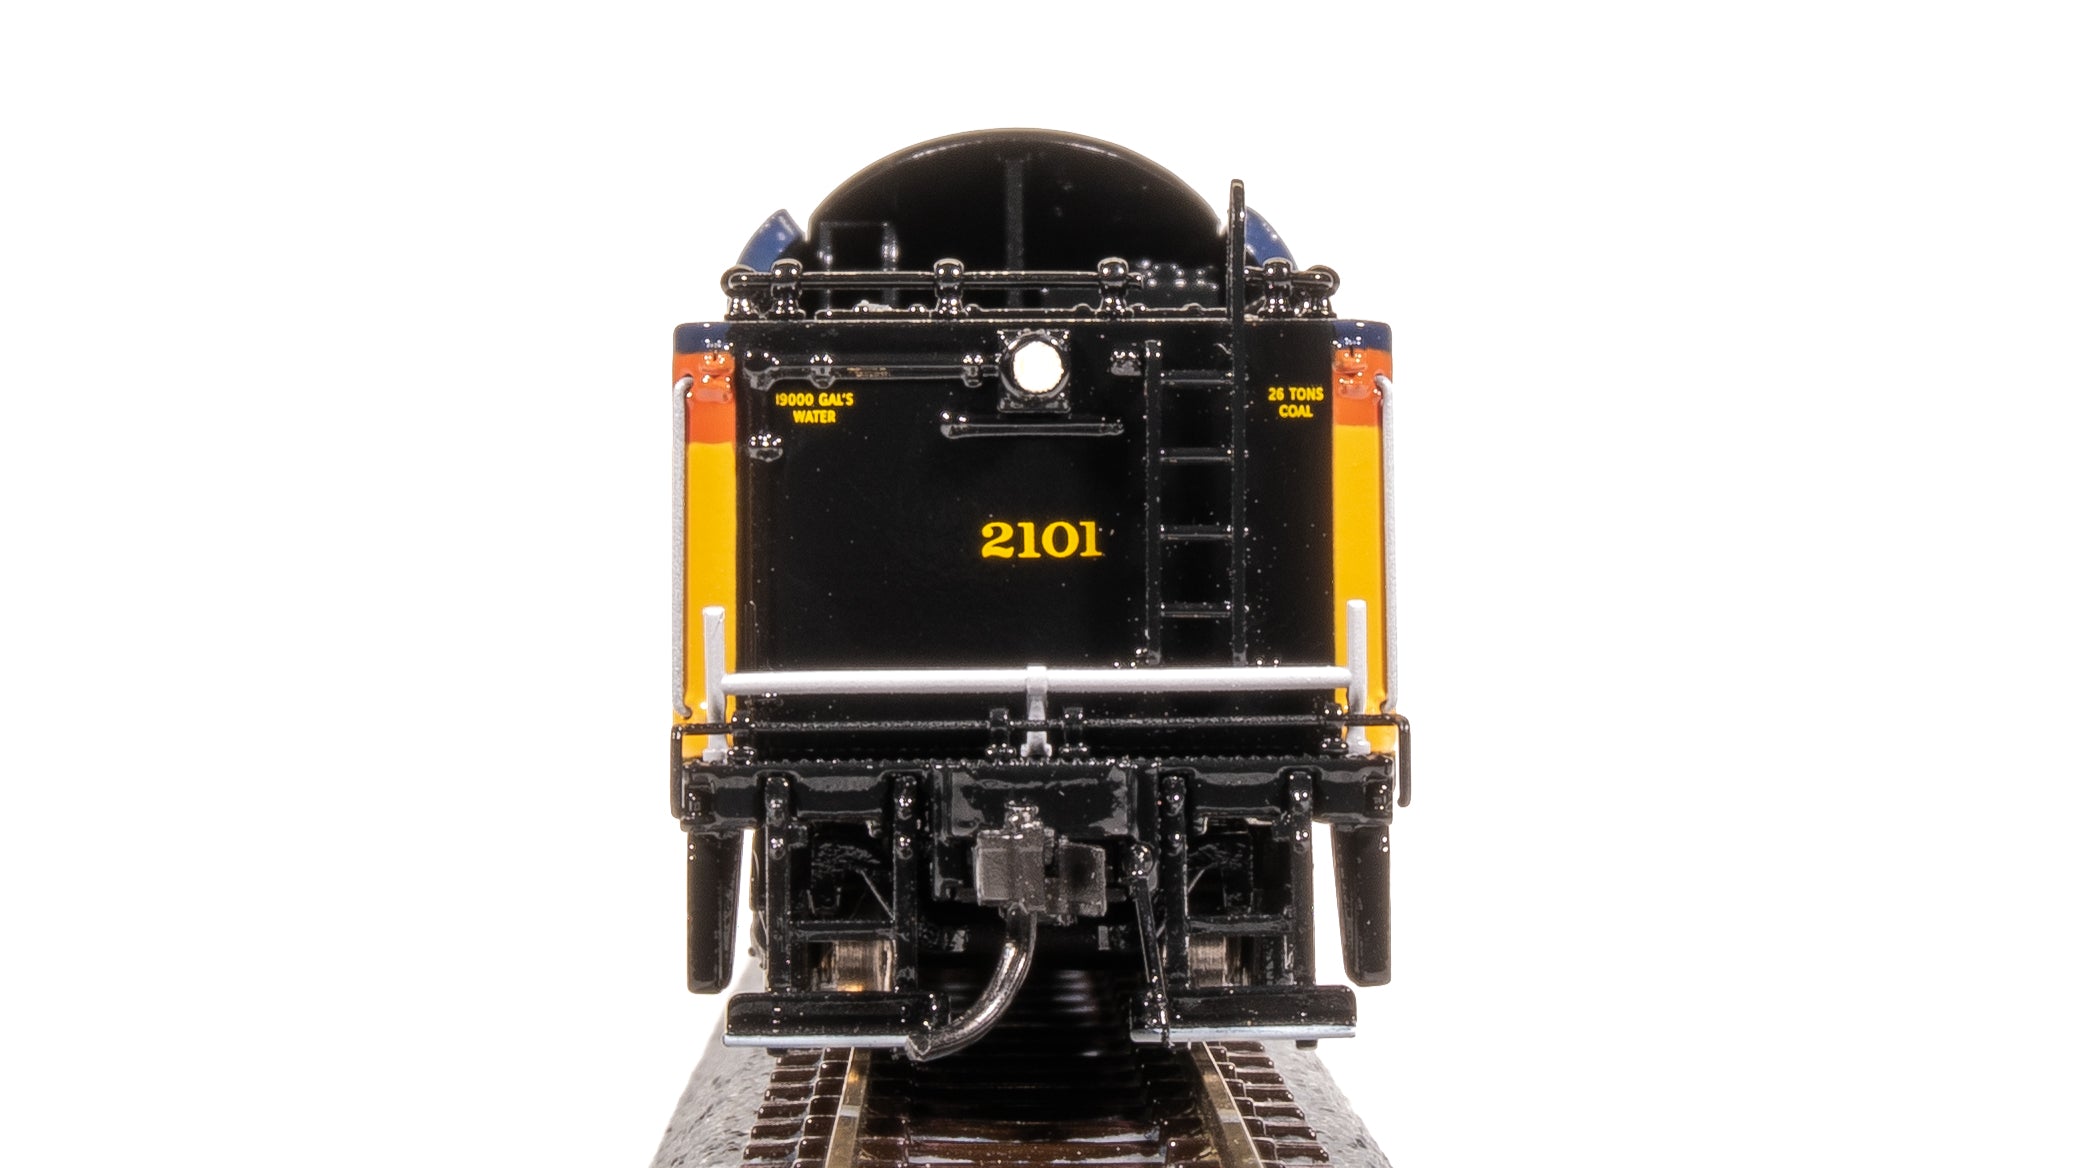 7406 Reading T1 4-8-4, Chessie Steam Special #2101, Paragon4 Sound/DC/DCC, Smoke, N